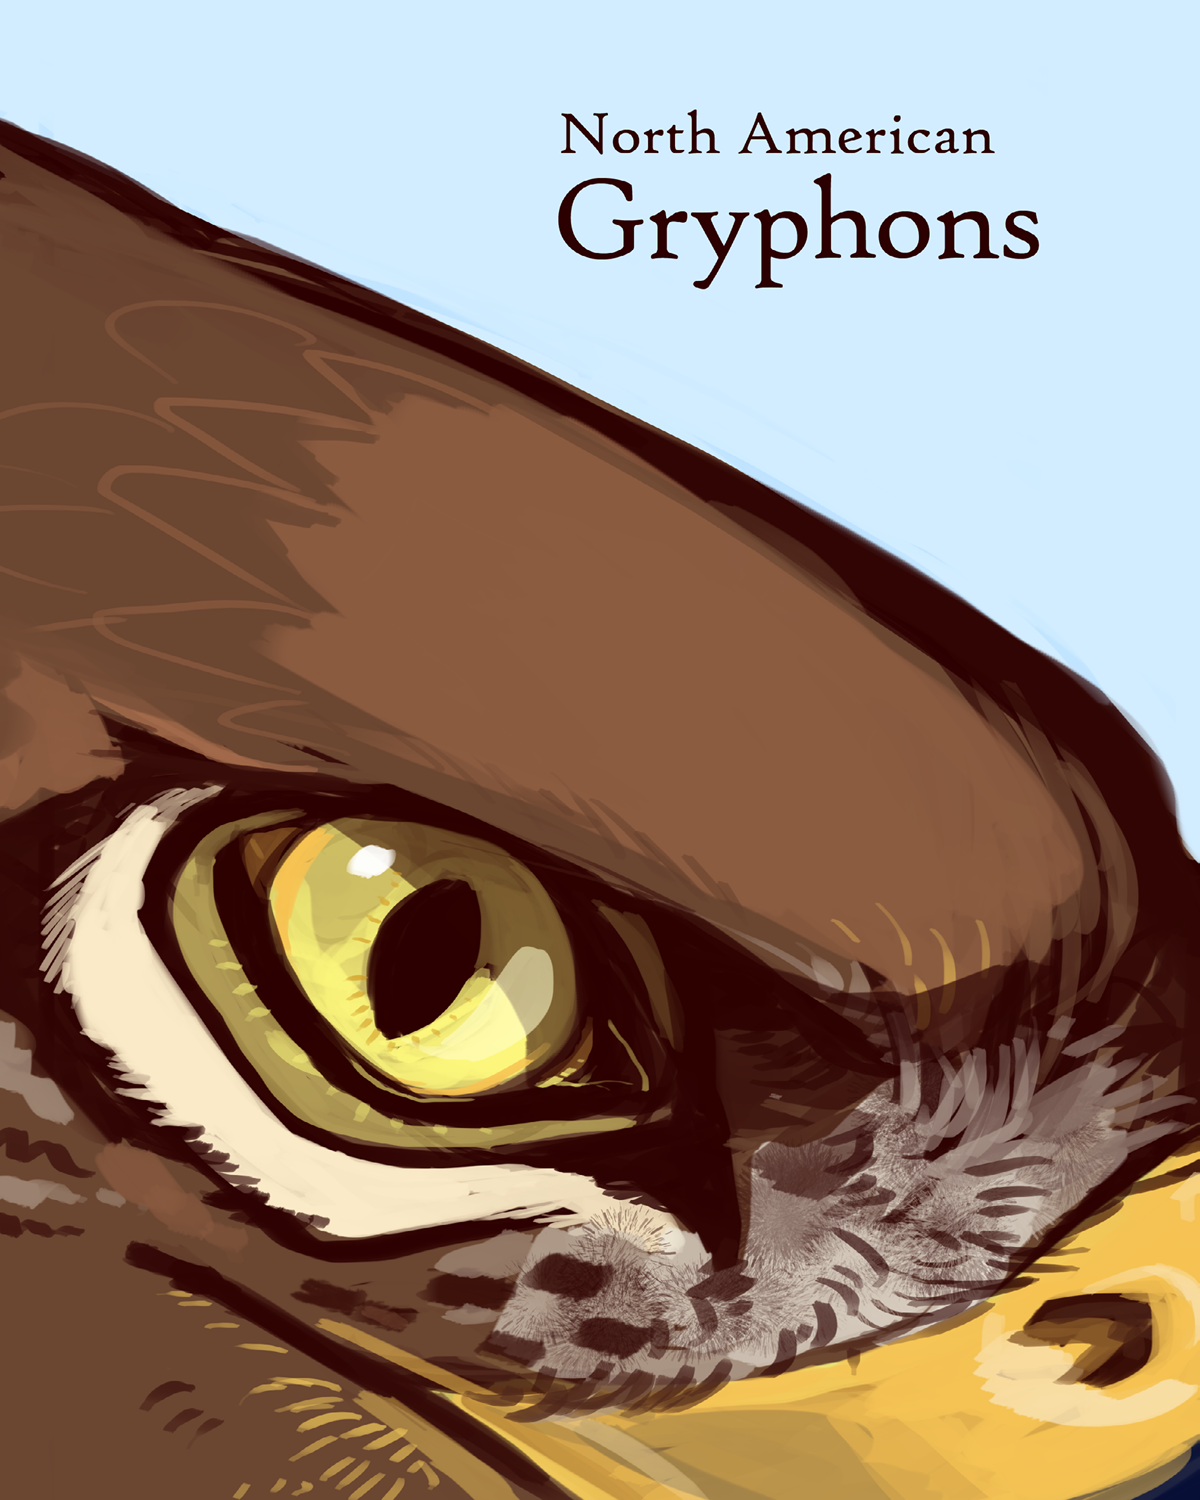 North American gryphons gryphon Griffin Griffins mythology birds books children's book